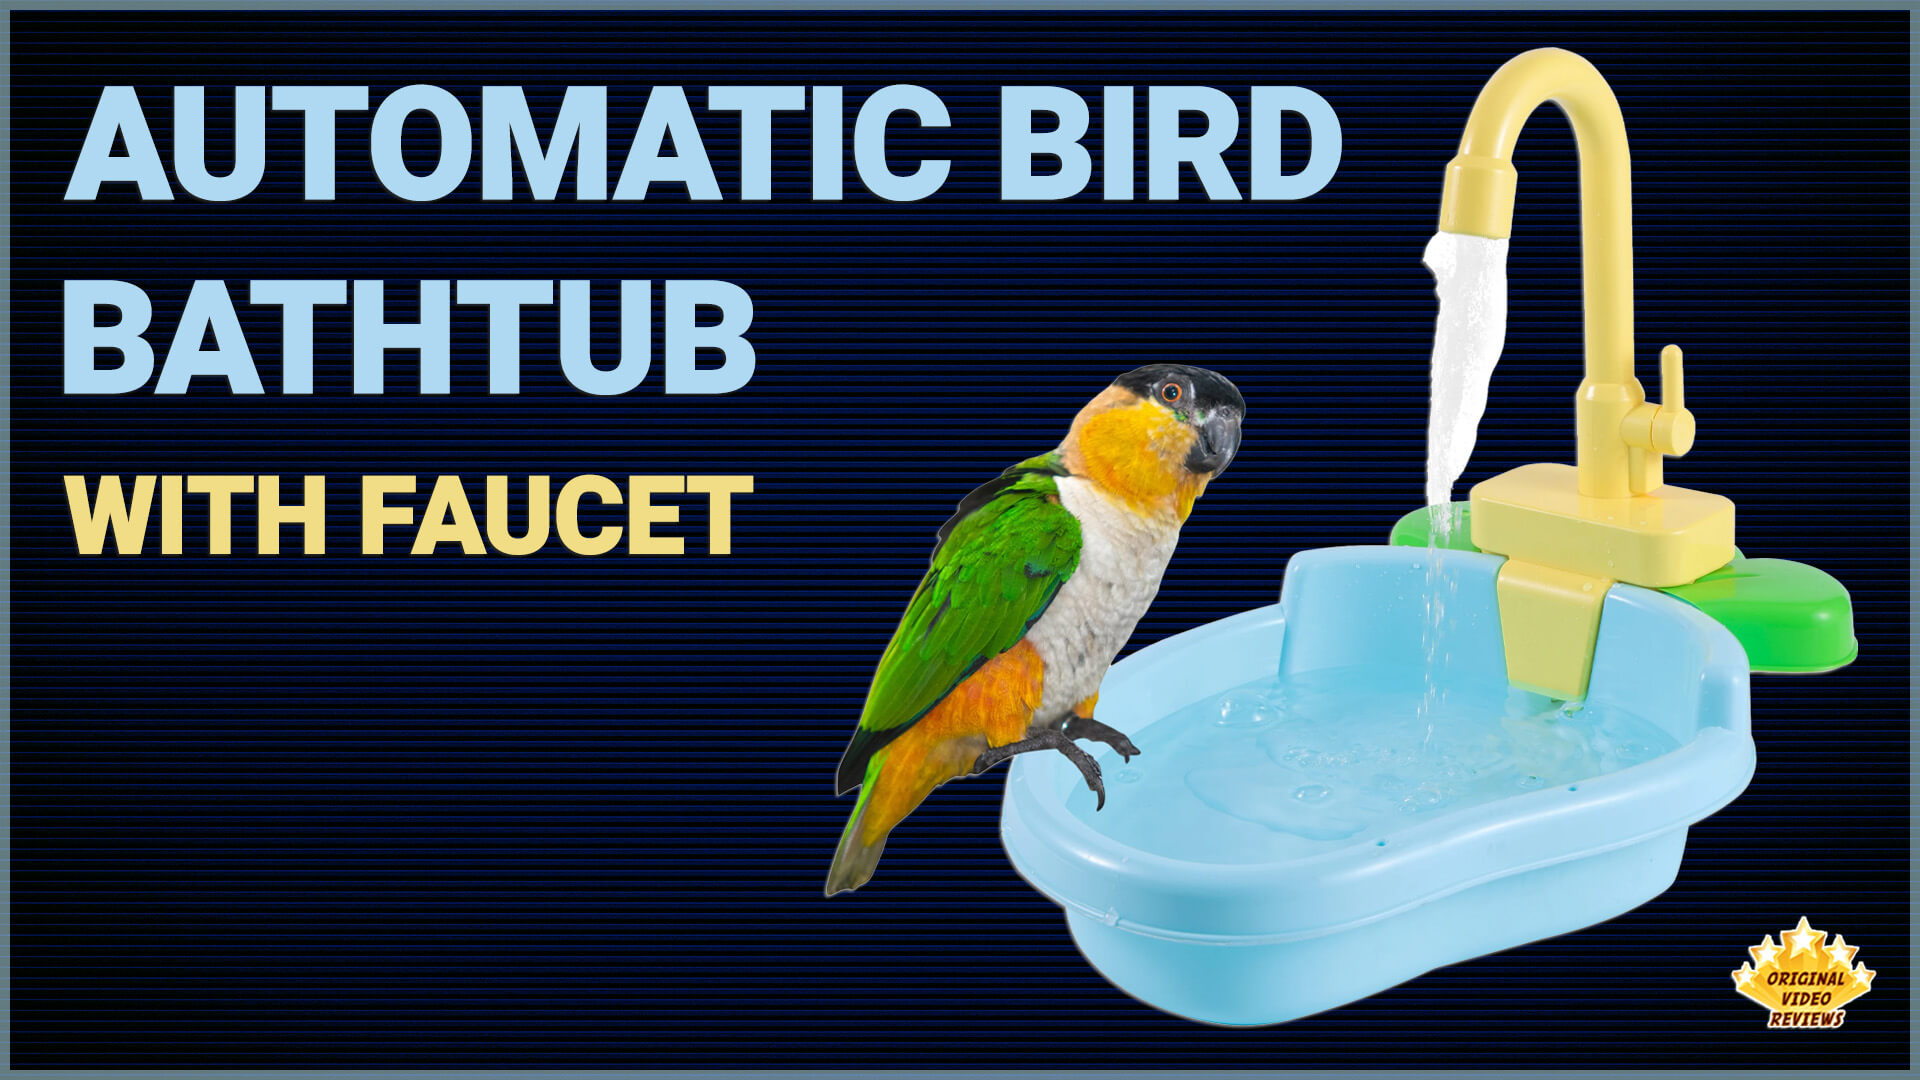 Automatic Bird Bathtub with Faucet